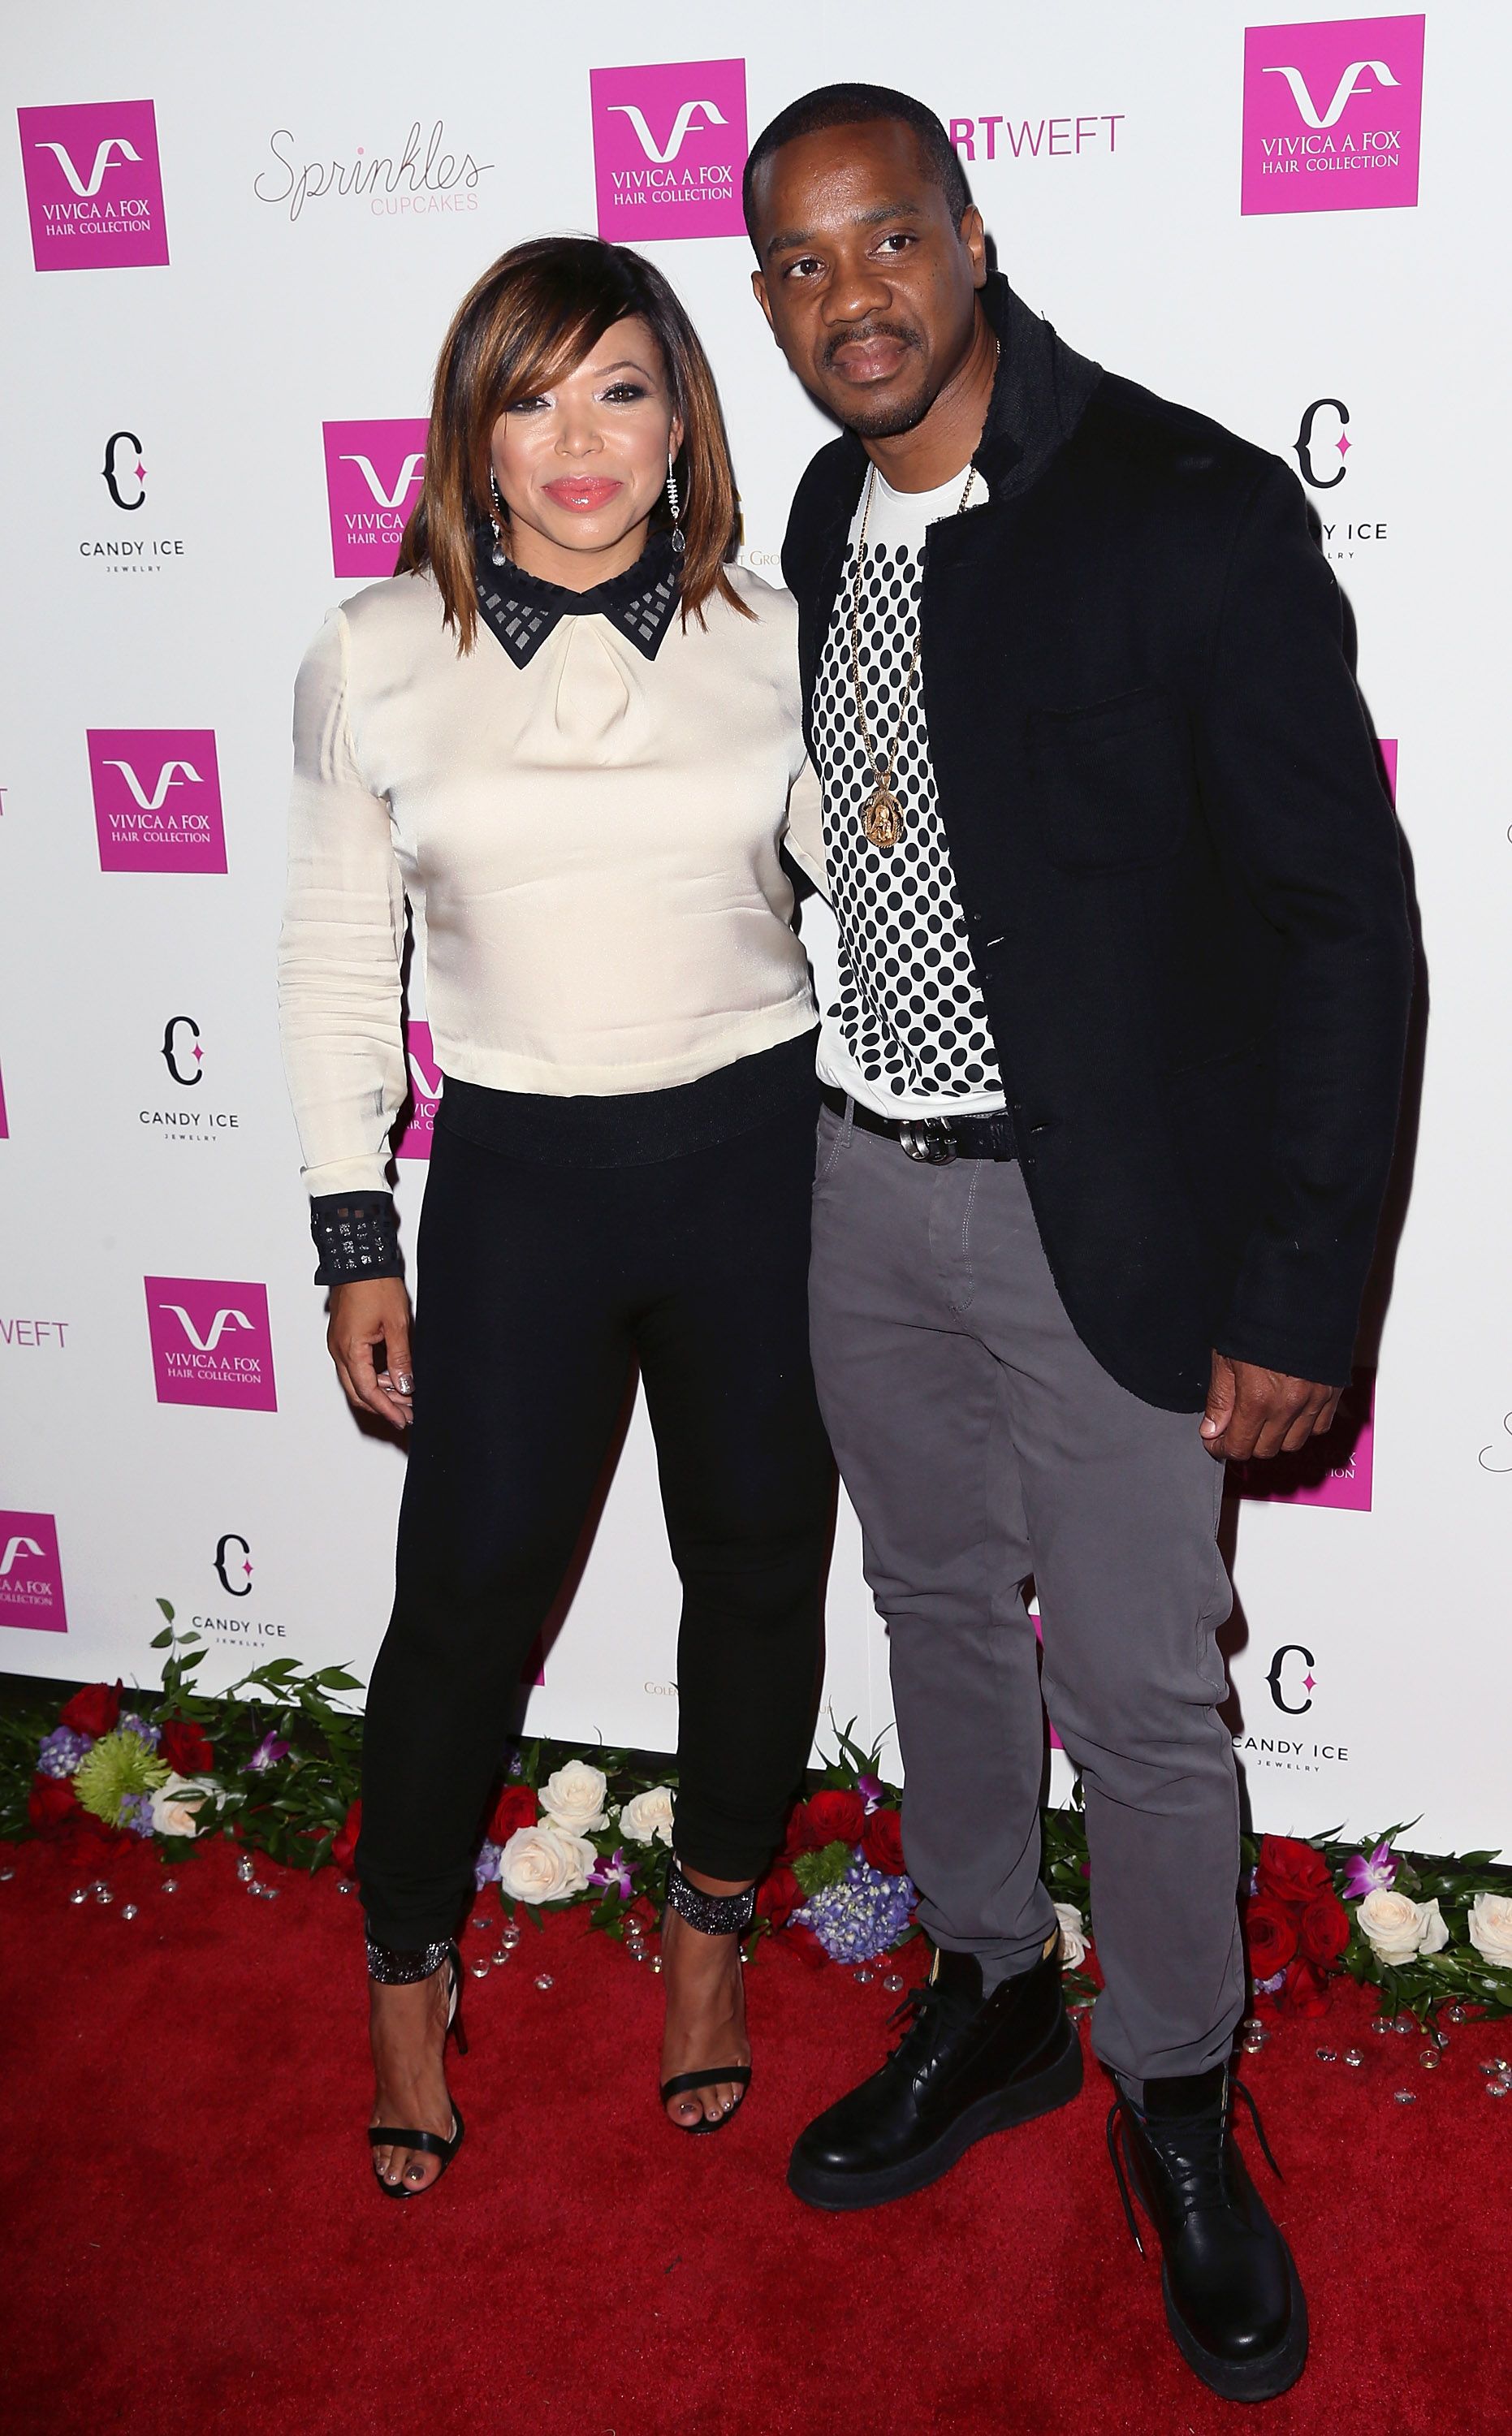 Tisha Campbell and Duane Martin during Vivica A. Fox’s 50th birthday celebration on August 2, 2014 in California. | Source: Getty Images